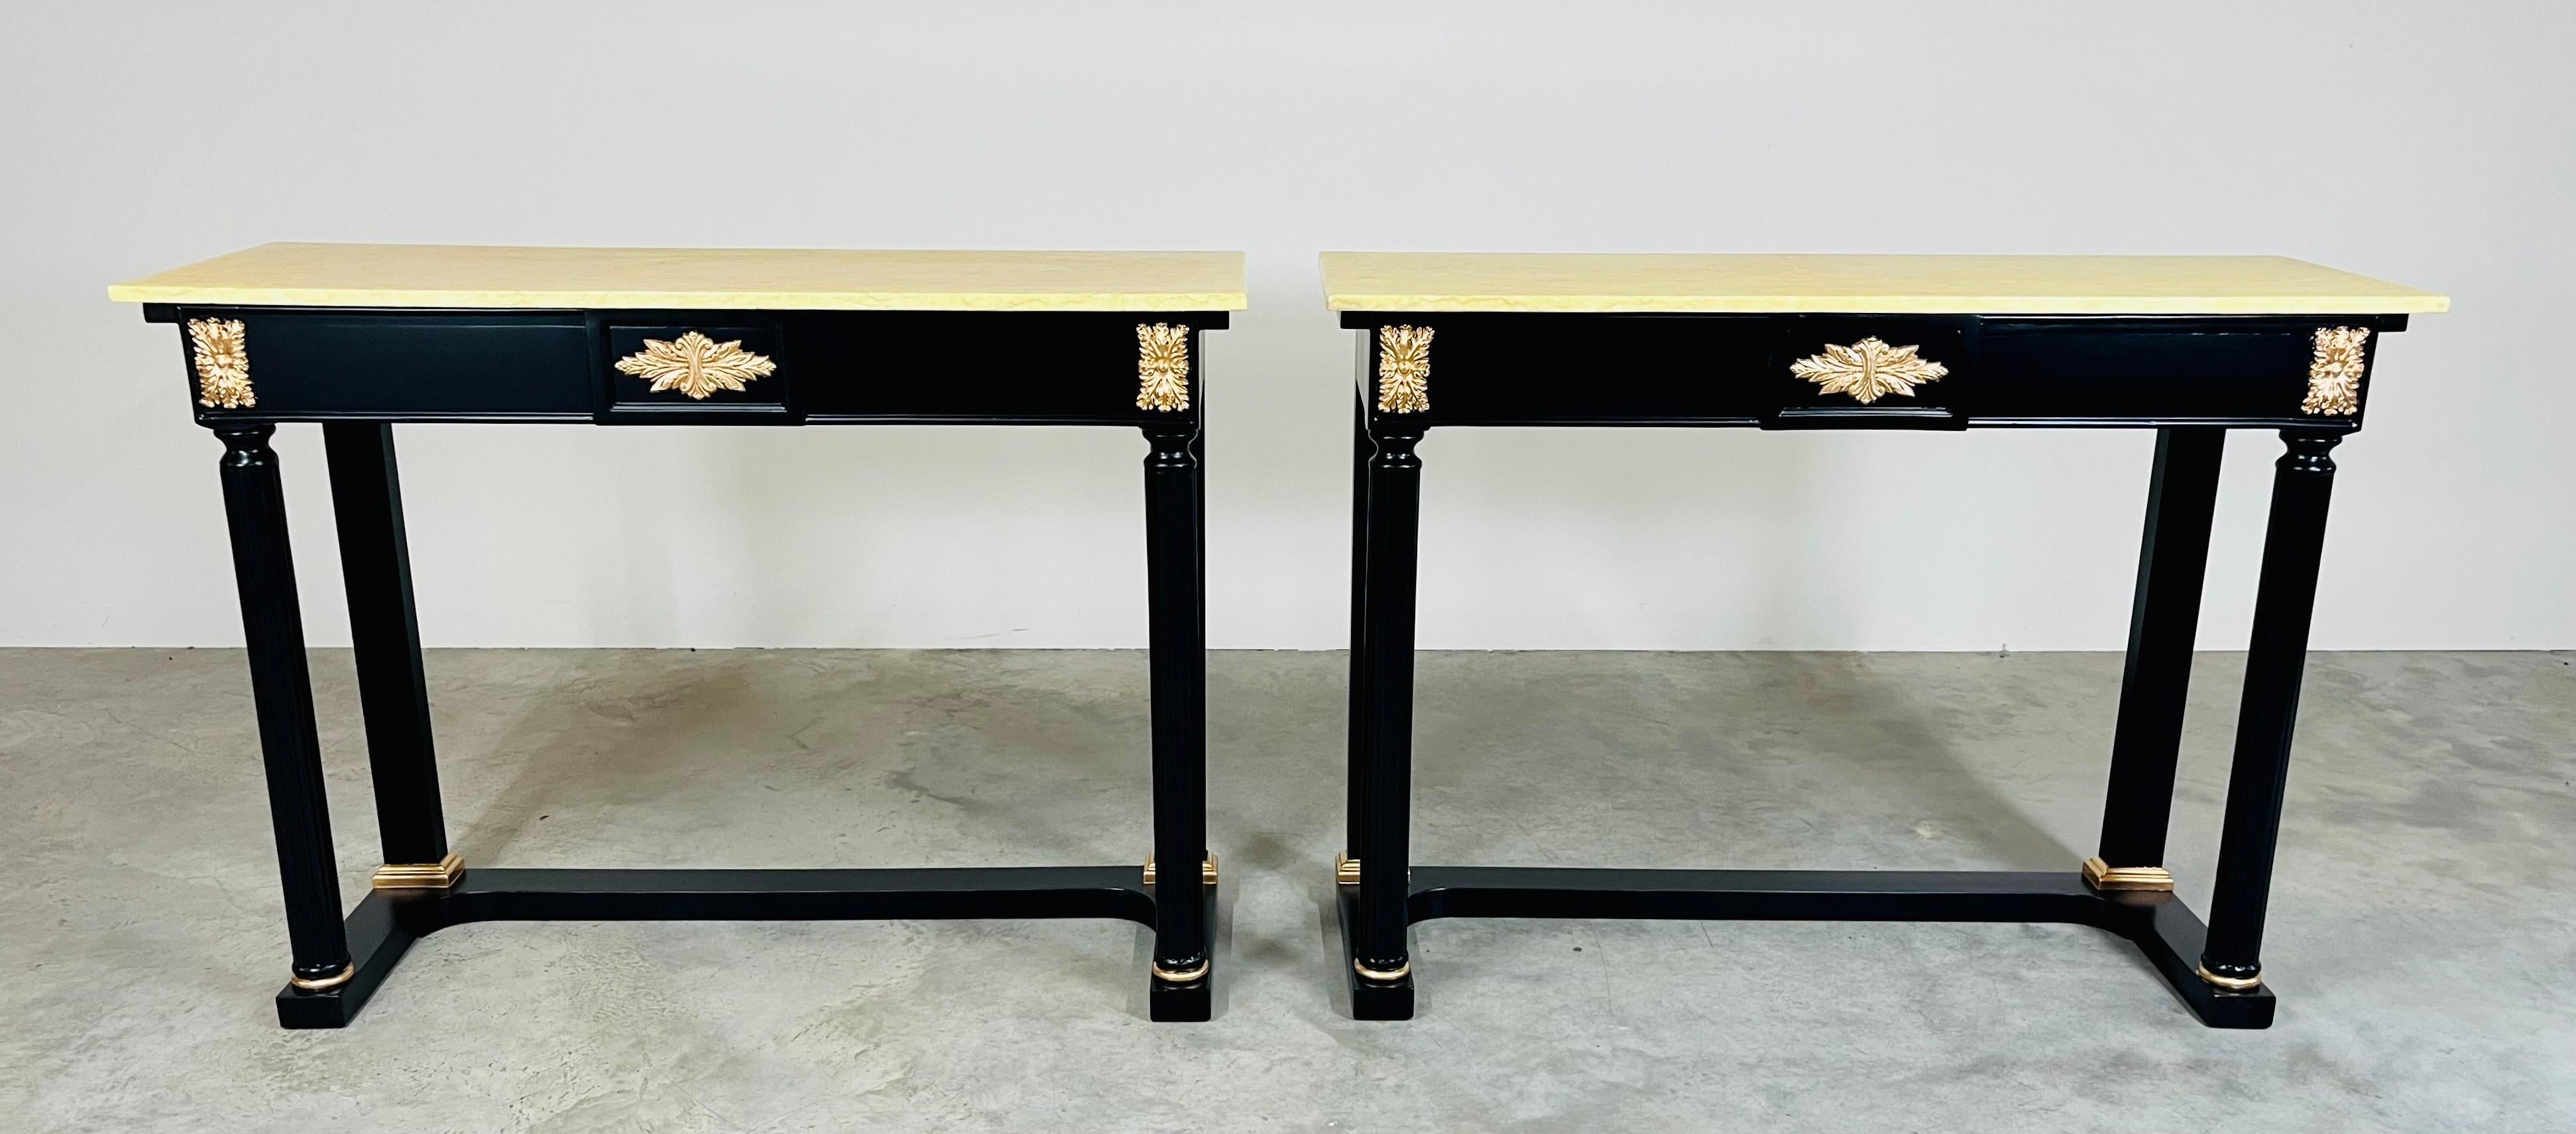 Opulent Louis XVI black lacquered console table having vintage Yellow Valencia marble tops from Spain, Louis XVI tapered legs with gold leaf accents throughout. Sold by the piece. We have 2 available. 
 In fabulous condition, made circa 1950.